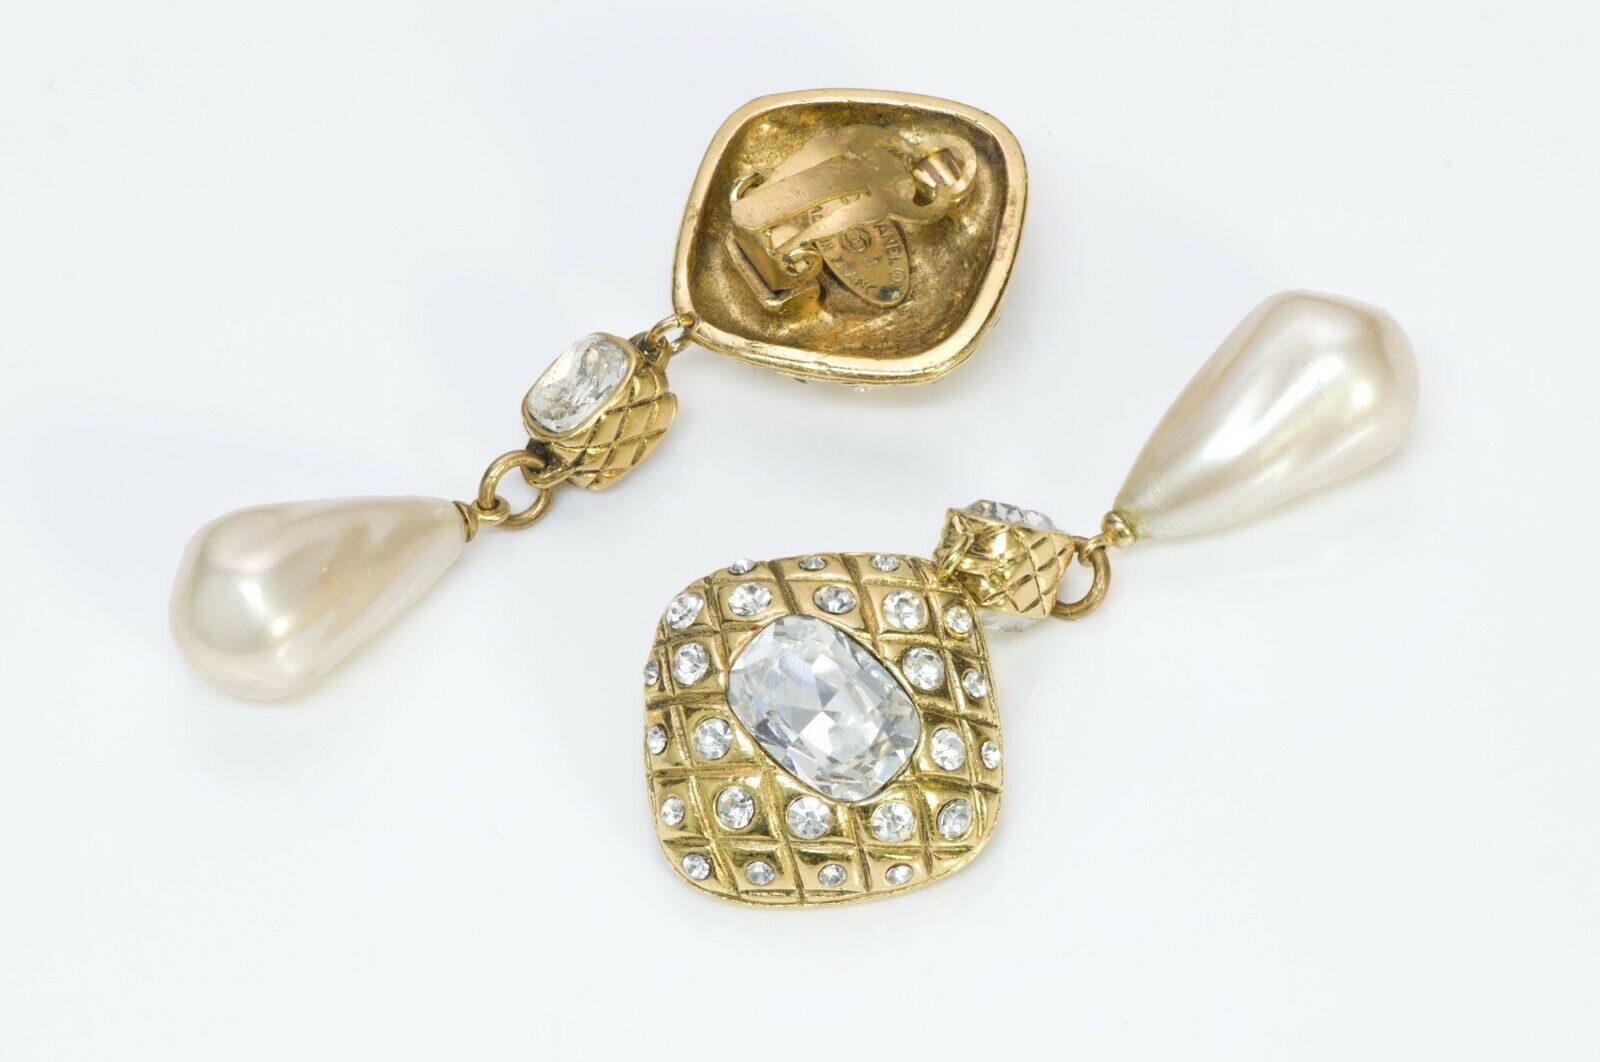 CHANEL Vintage 1980’s Long Quilted Crystal Pearl Drop Earrings